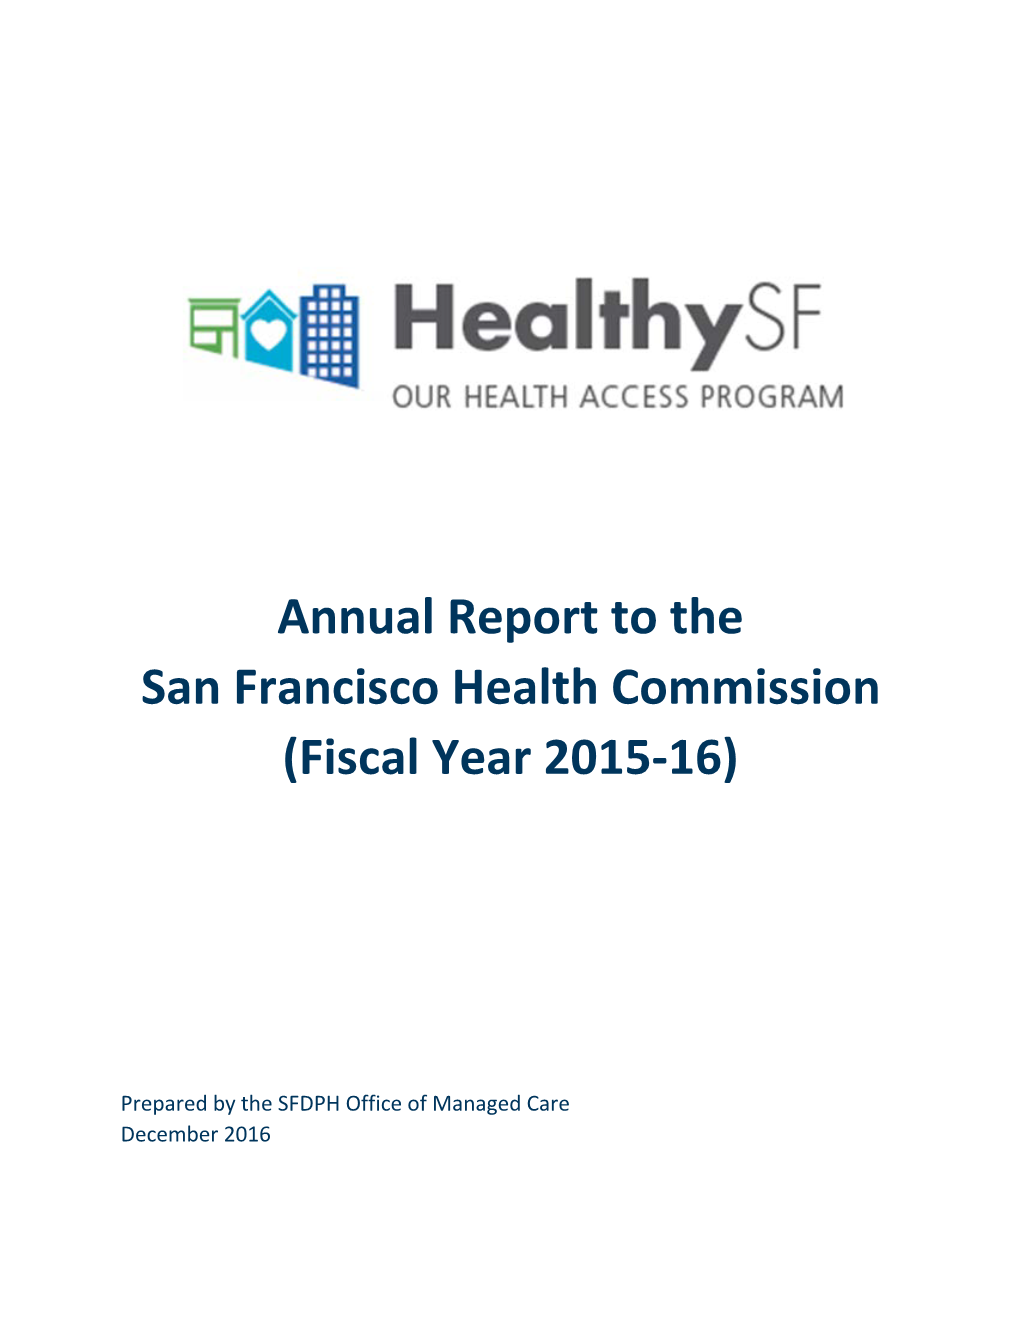 Annual Report to the San Francisco Health Commission (Fiscal Year 2015-16)